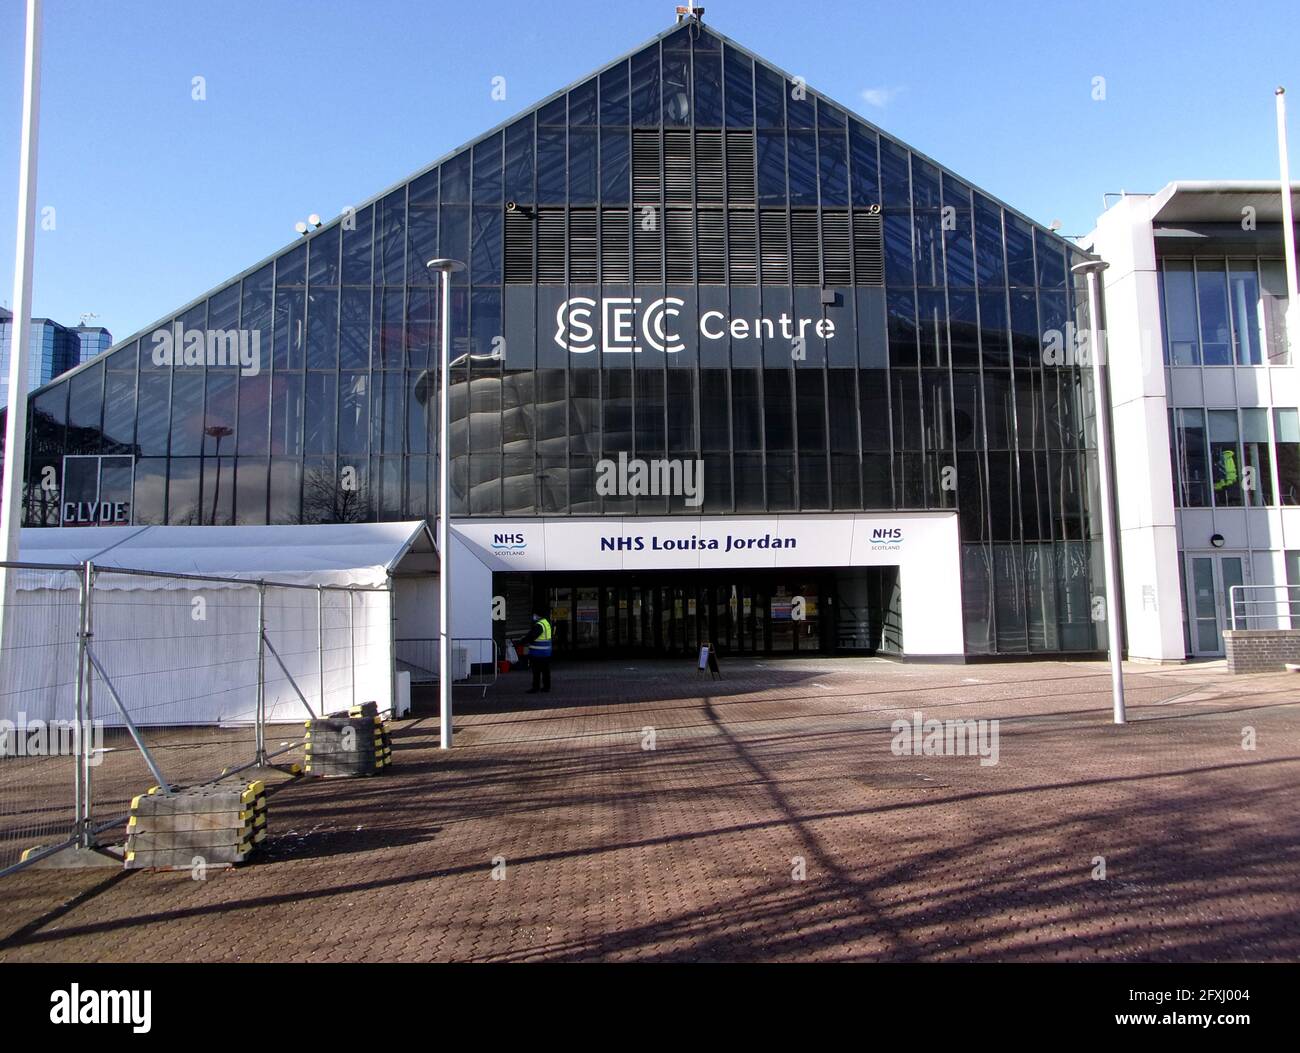 This is the SCE Centre in Glasgow. It is normally a music, concert and exhibition centre which has been temporarily converted  into a NHS hospital to administer the vaccines to Glasgow people to combat the Covid virus. 2021. ©ALAN WYLIE/ALAMY Stock Photo